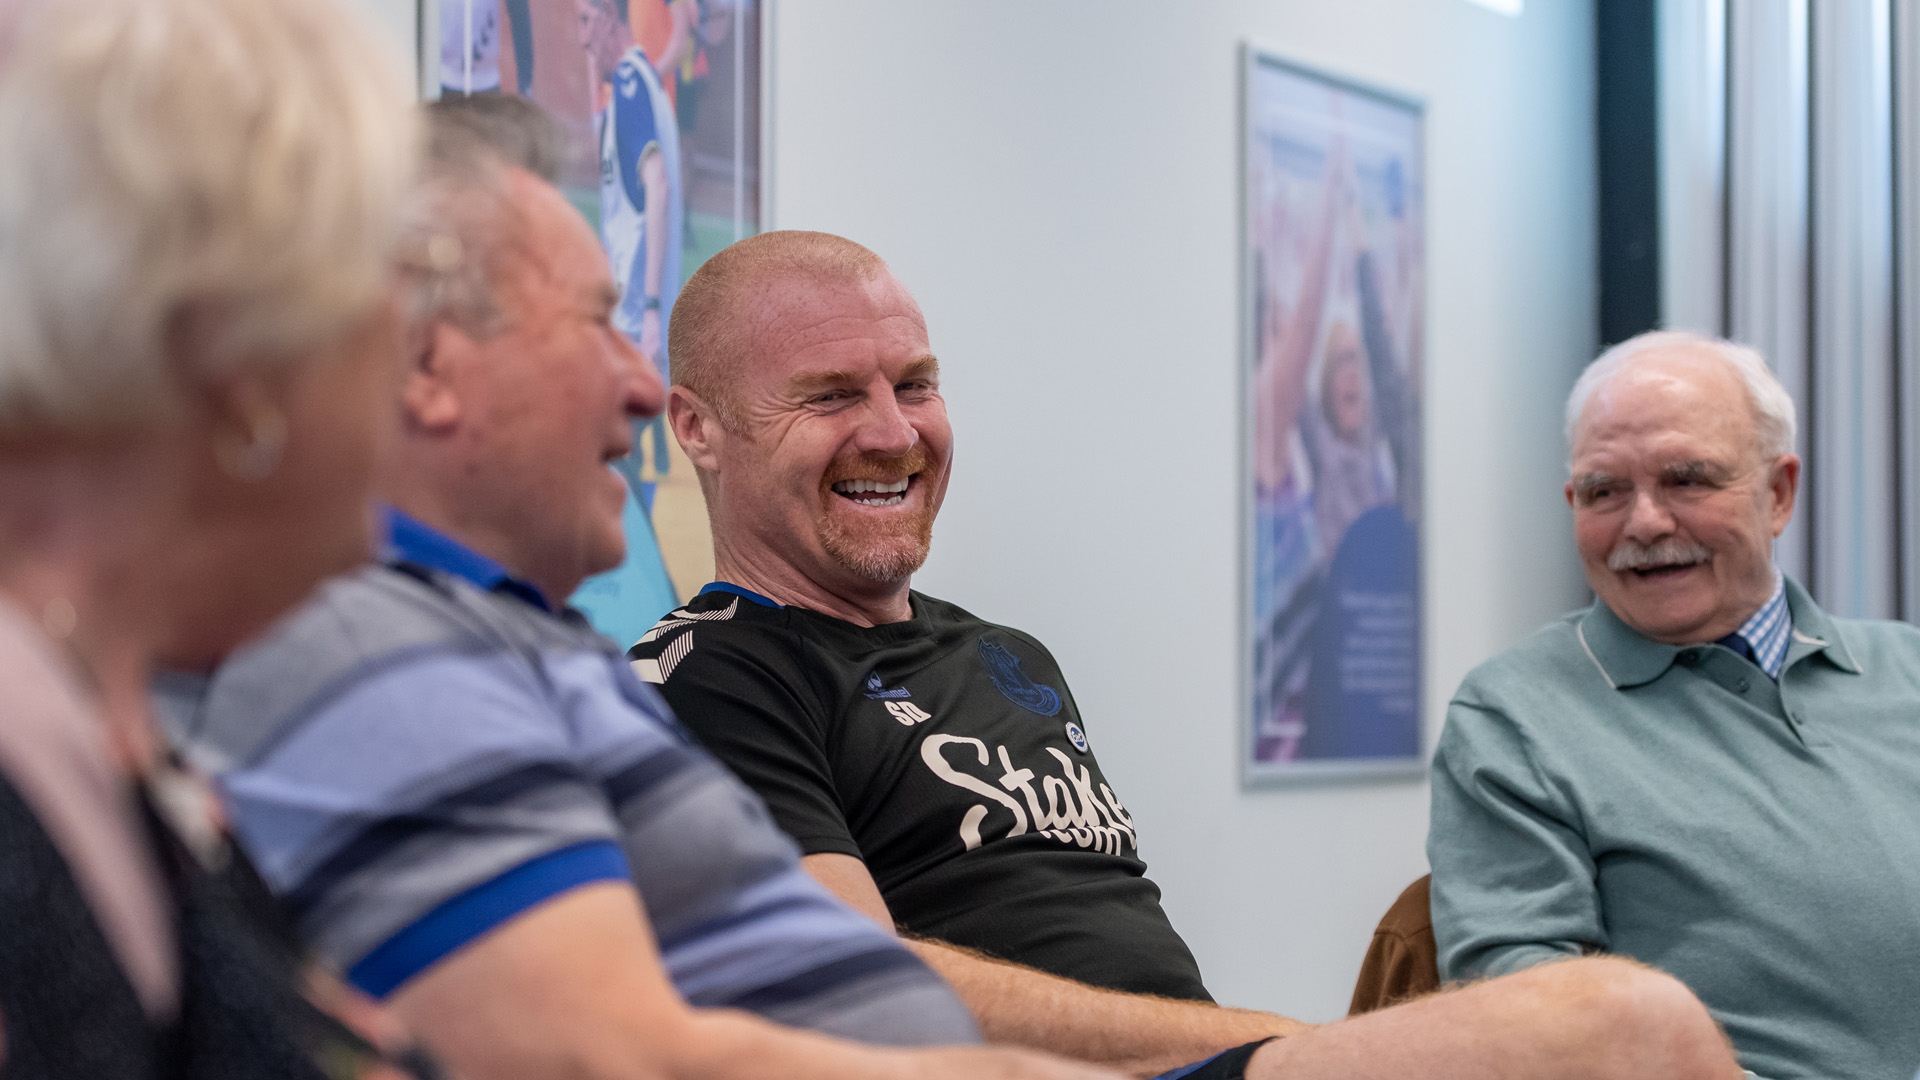 Dyche Discovers The ‘Power’ Of EitC’s Mental Health Work